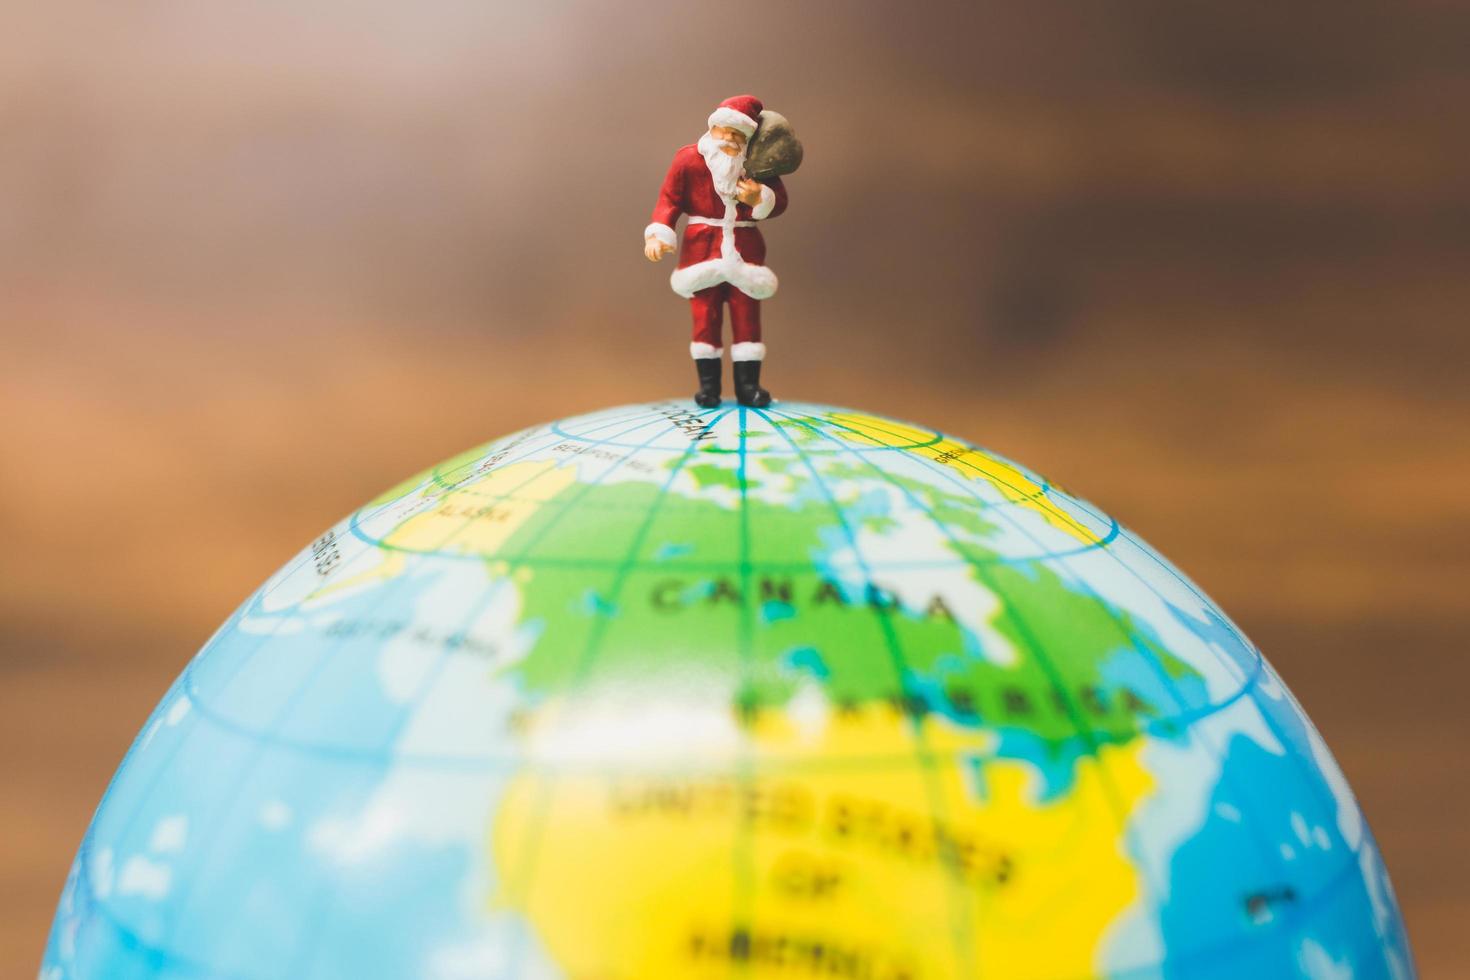 Miniature Santa Claus carrying gifts standing on a globe photo